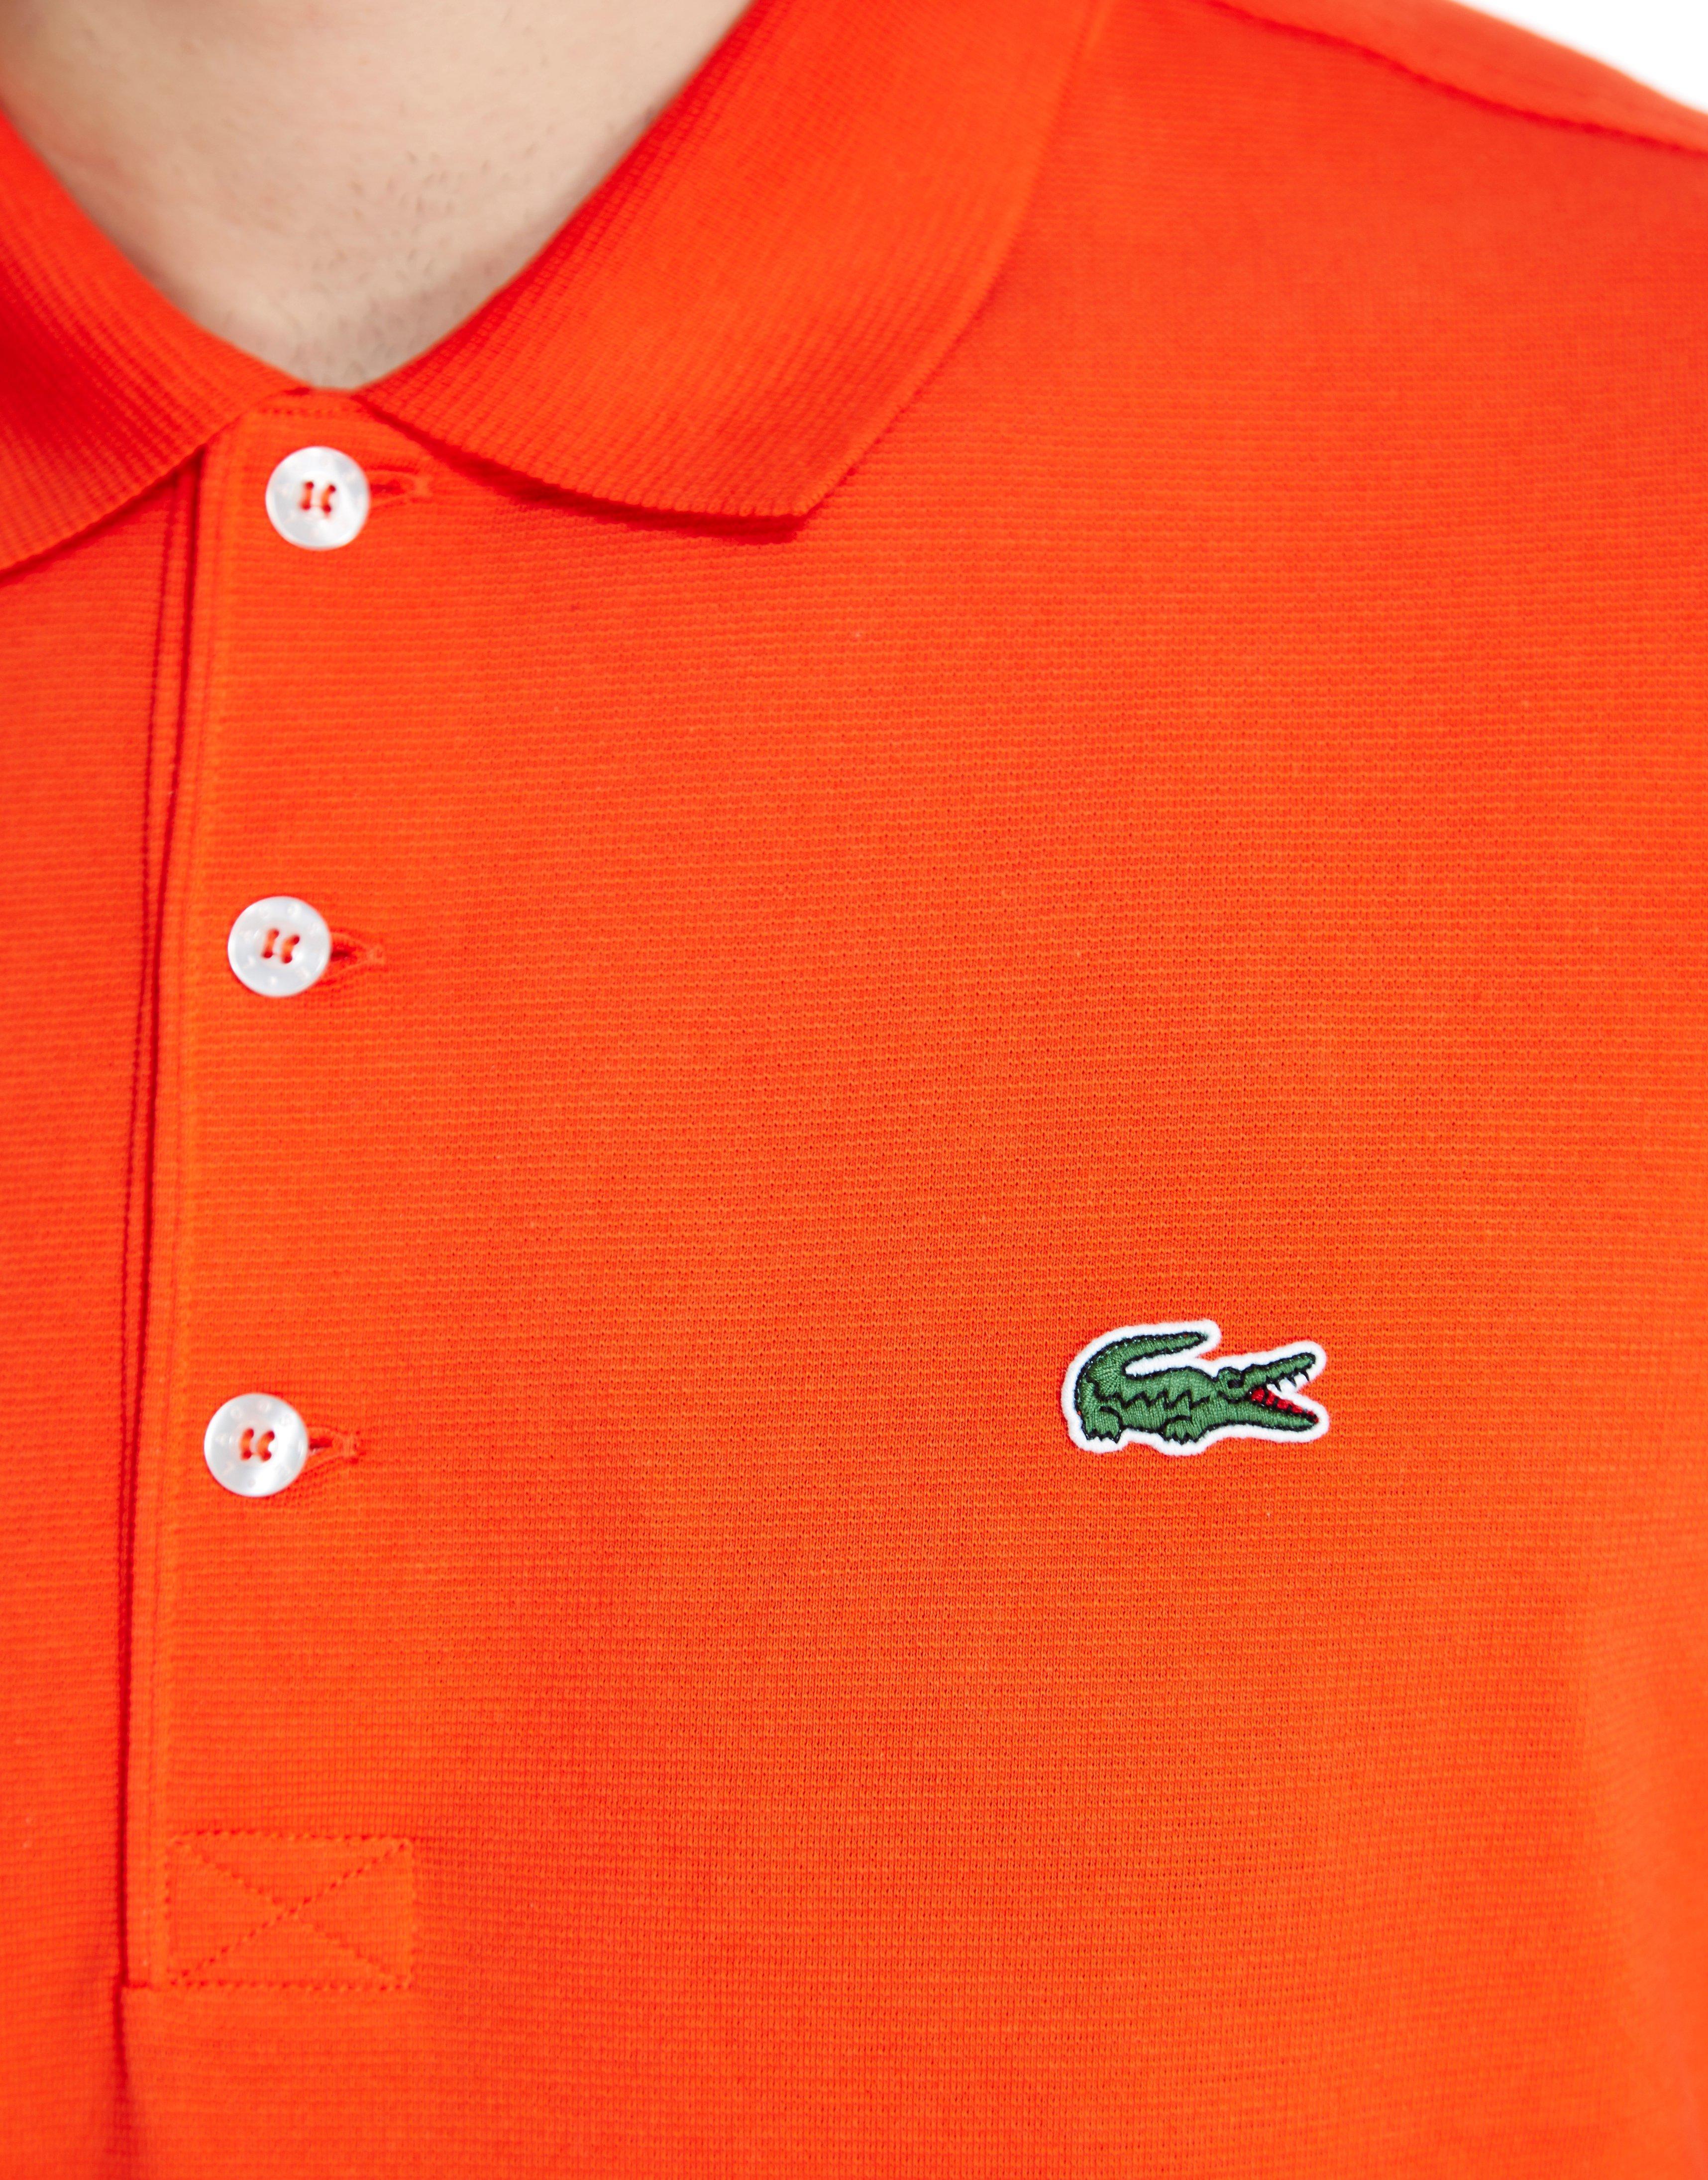 Alligator Clothing Logo - Lacoste Alligator Polo Shirt in Red for Men - Lyst